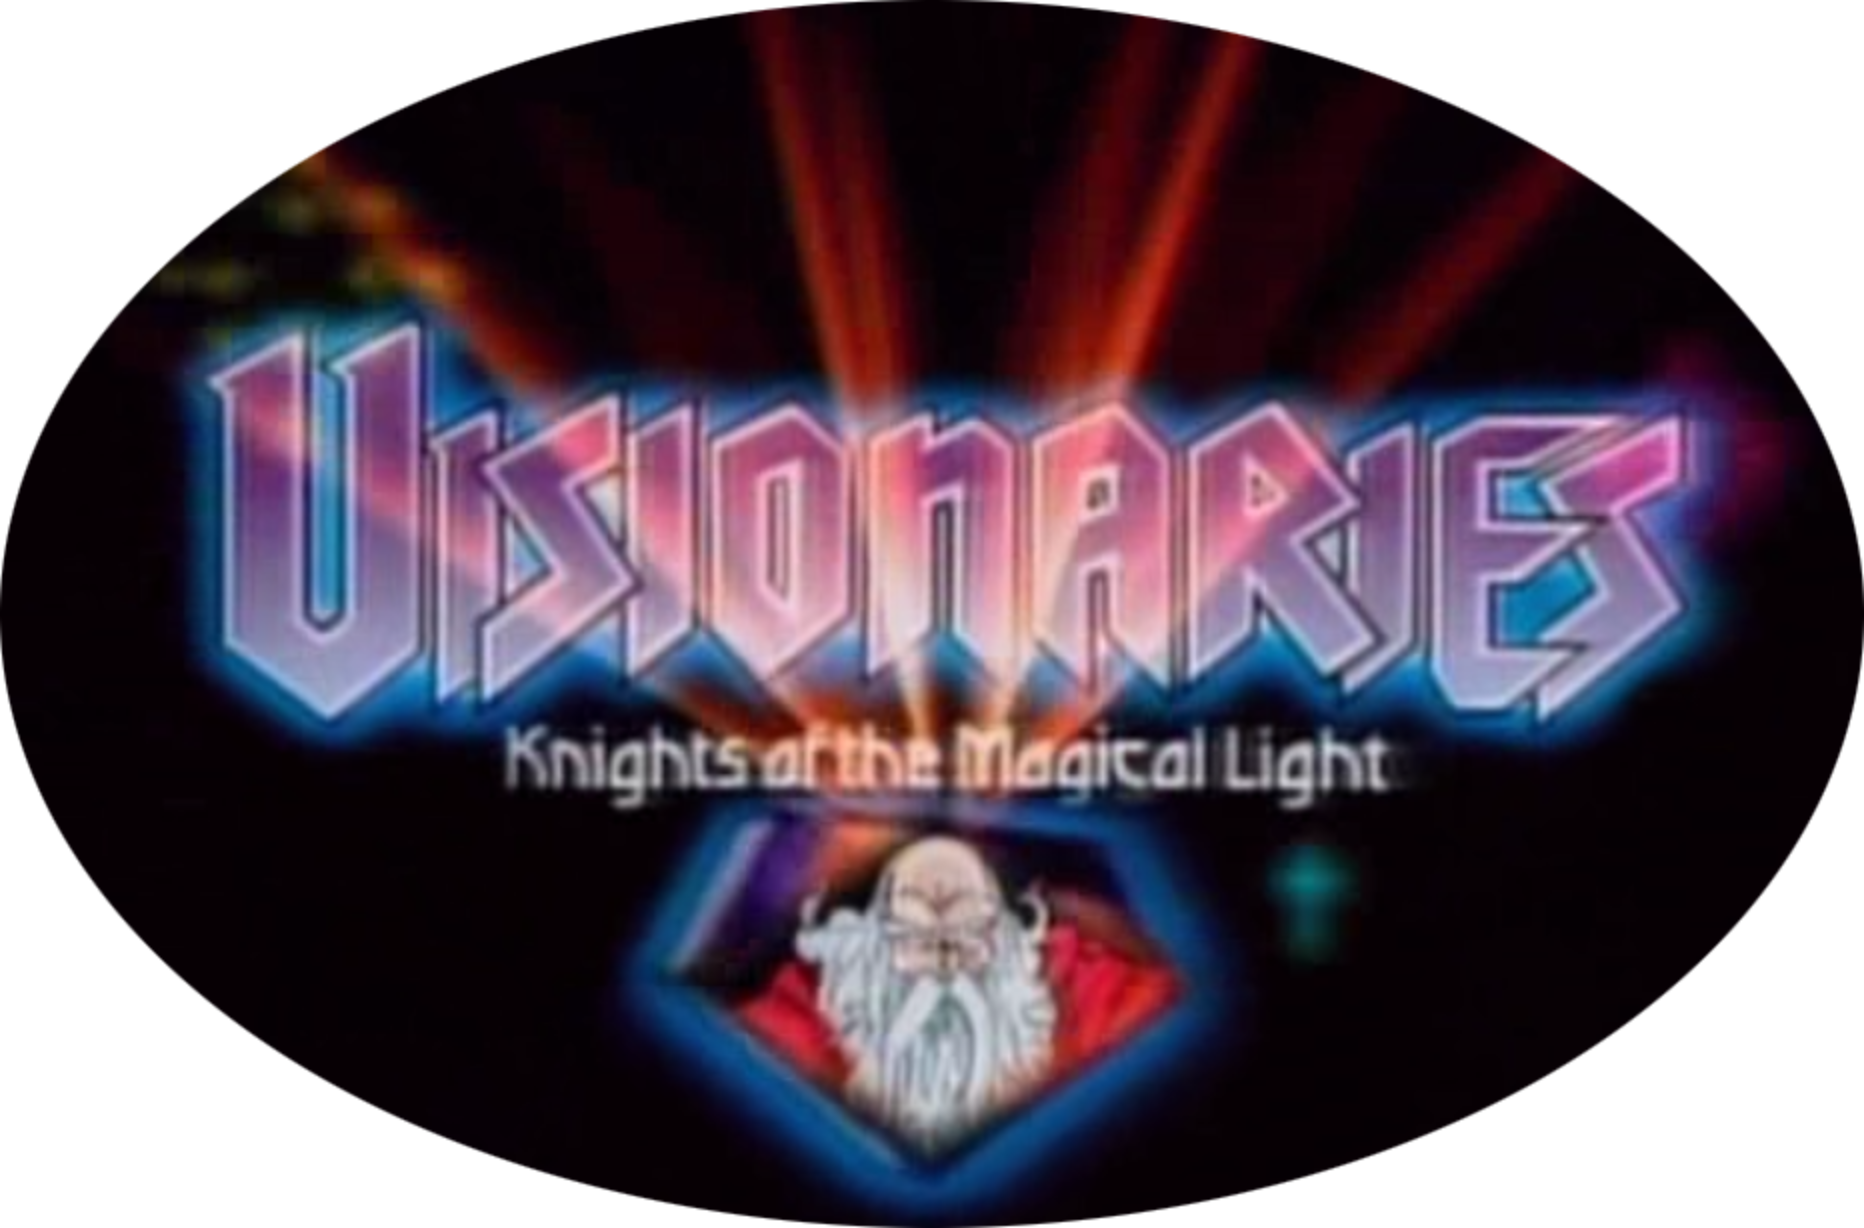 Visionaries: Knights of the Magical Light Complete (2 DVDs Box Set)